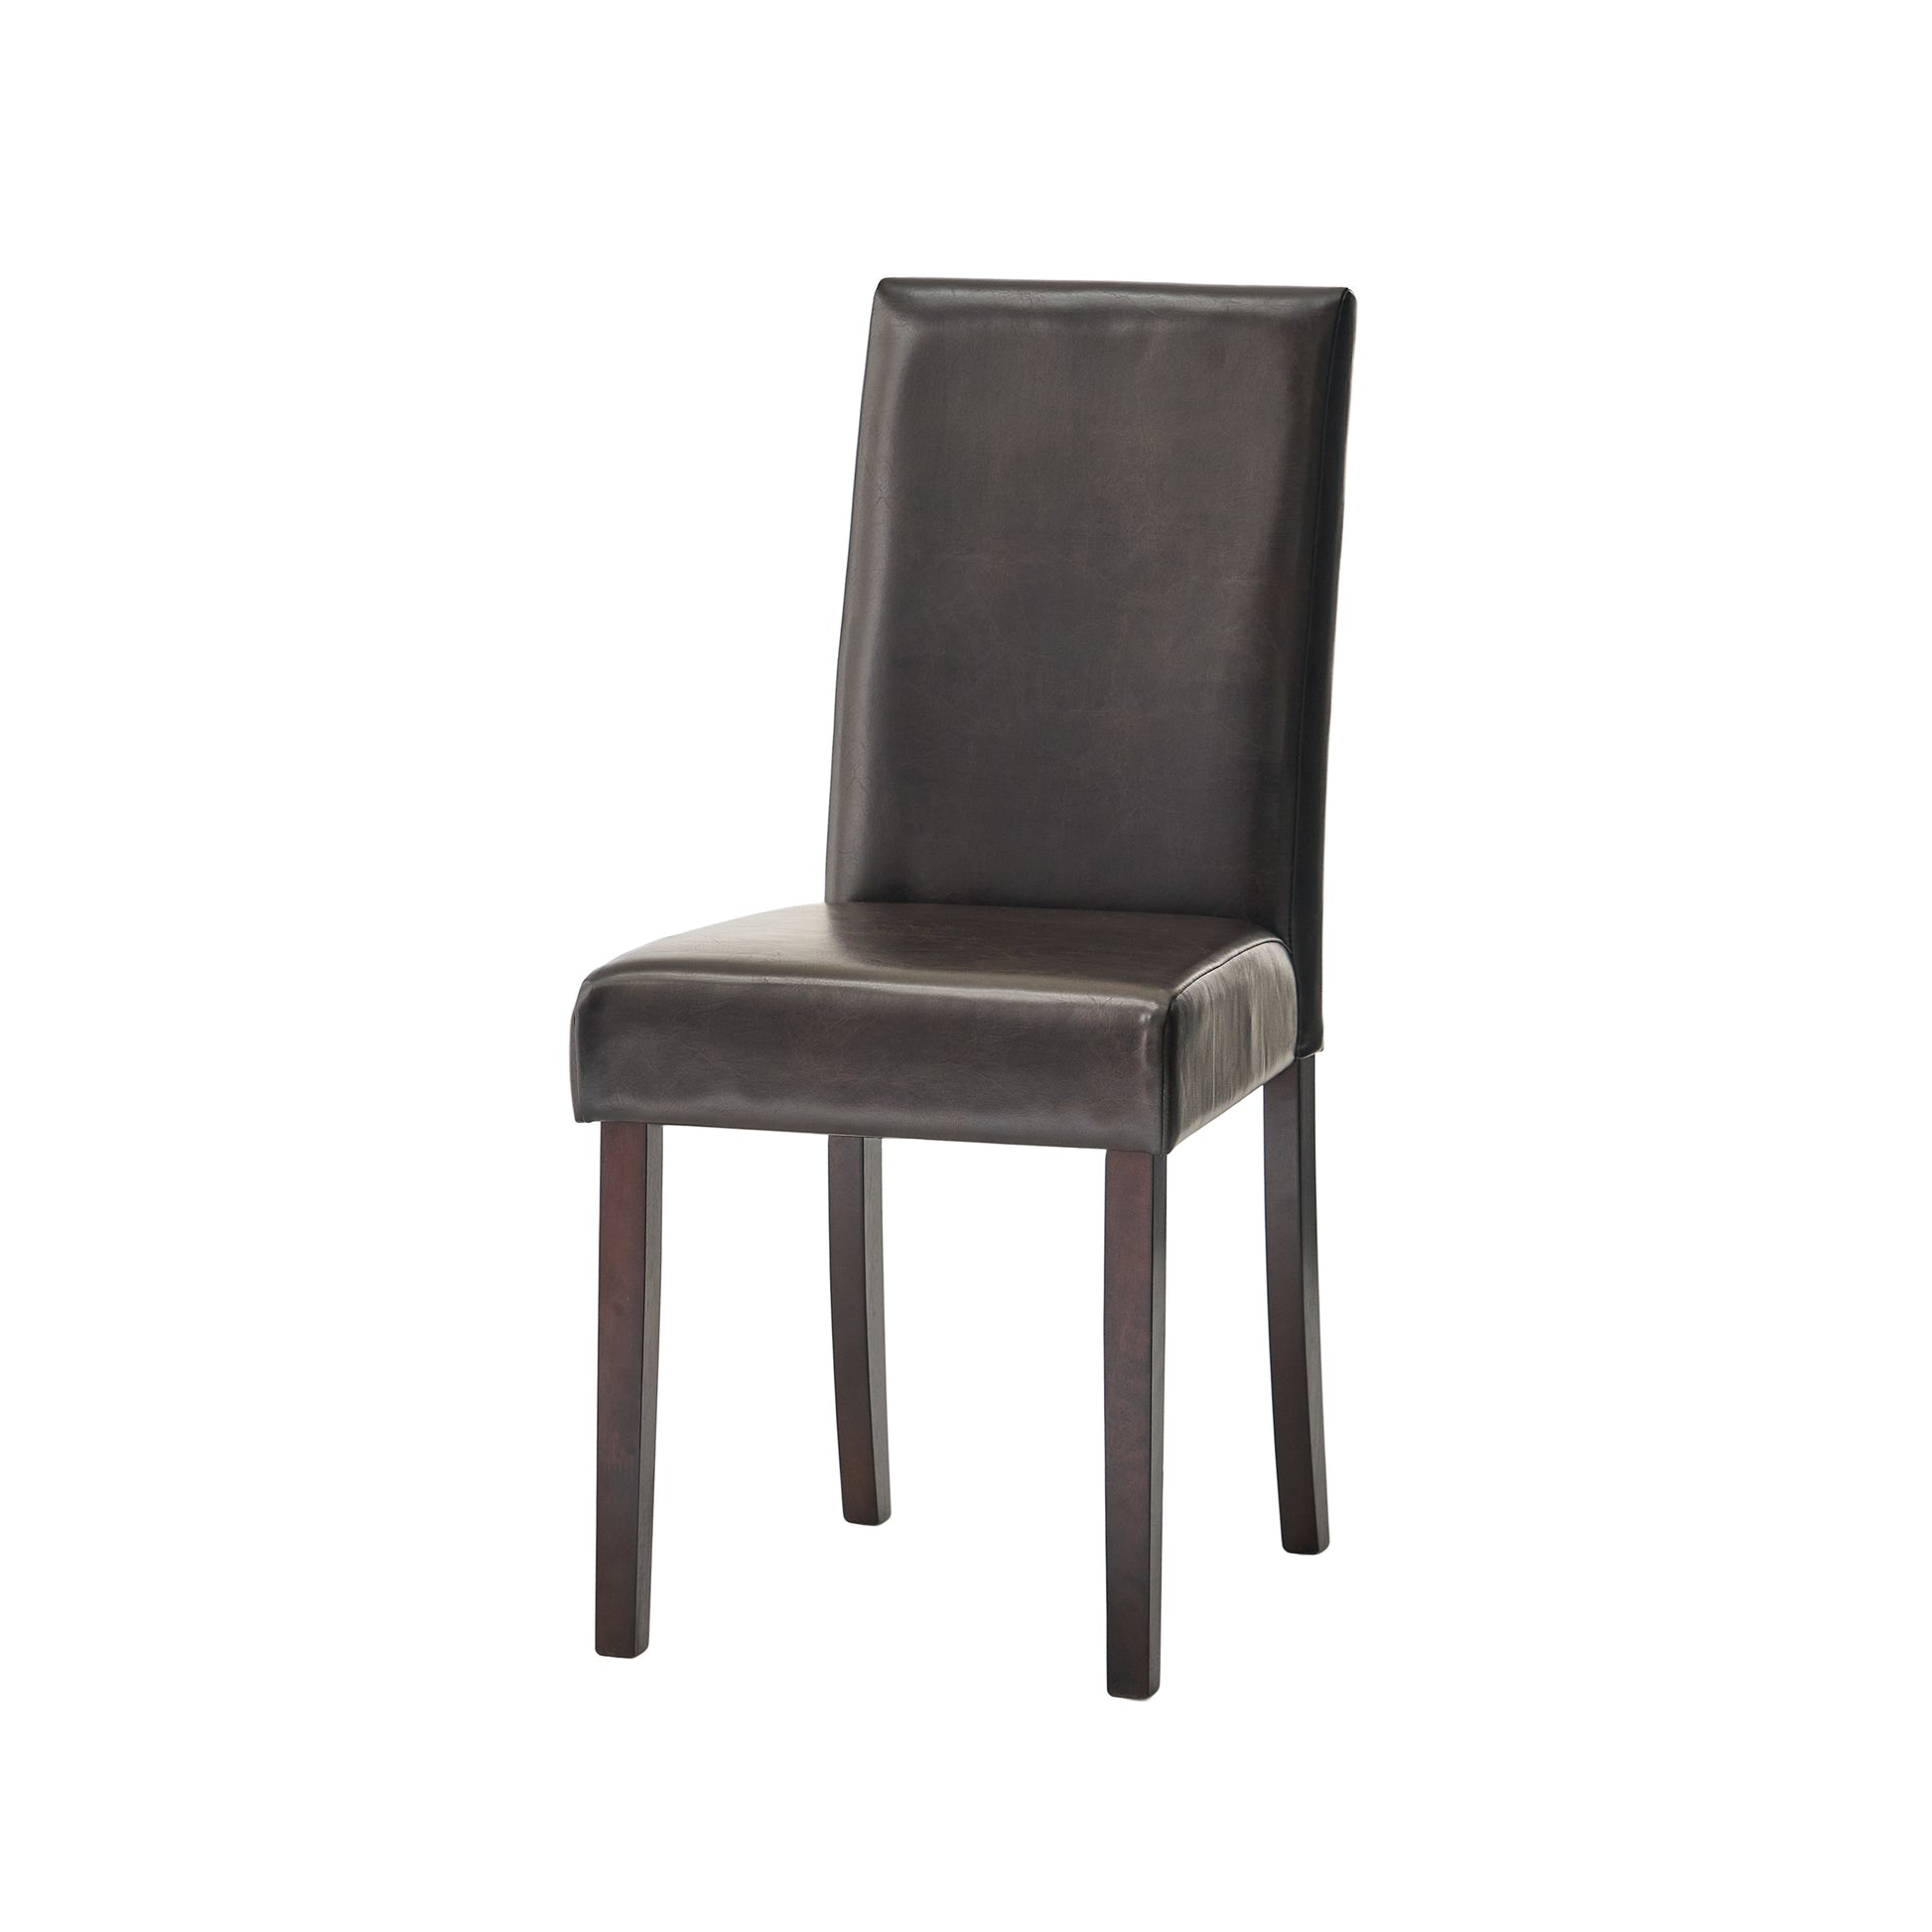 Ryan Kd Dining Chair - Brown Leather